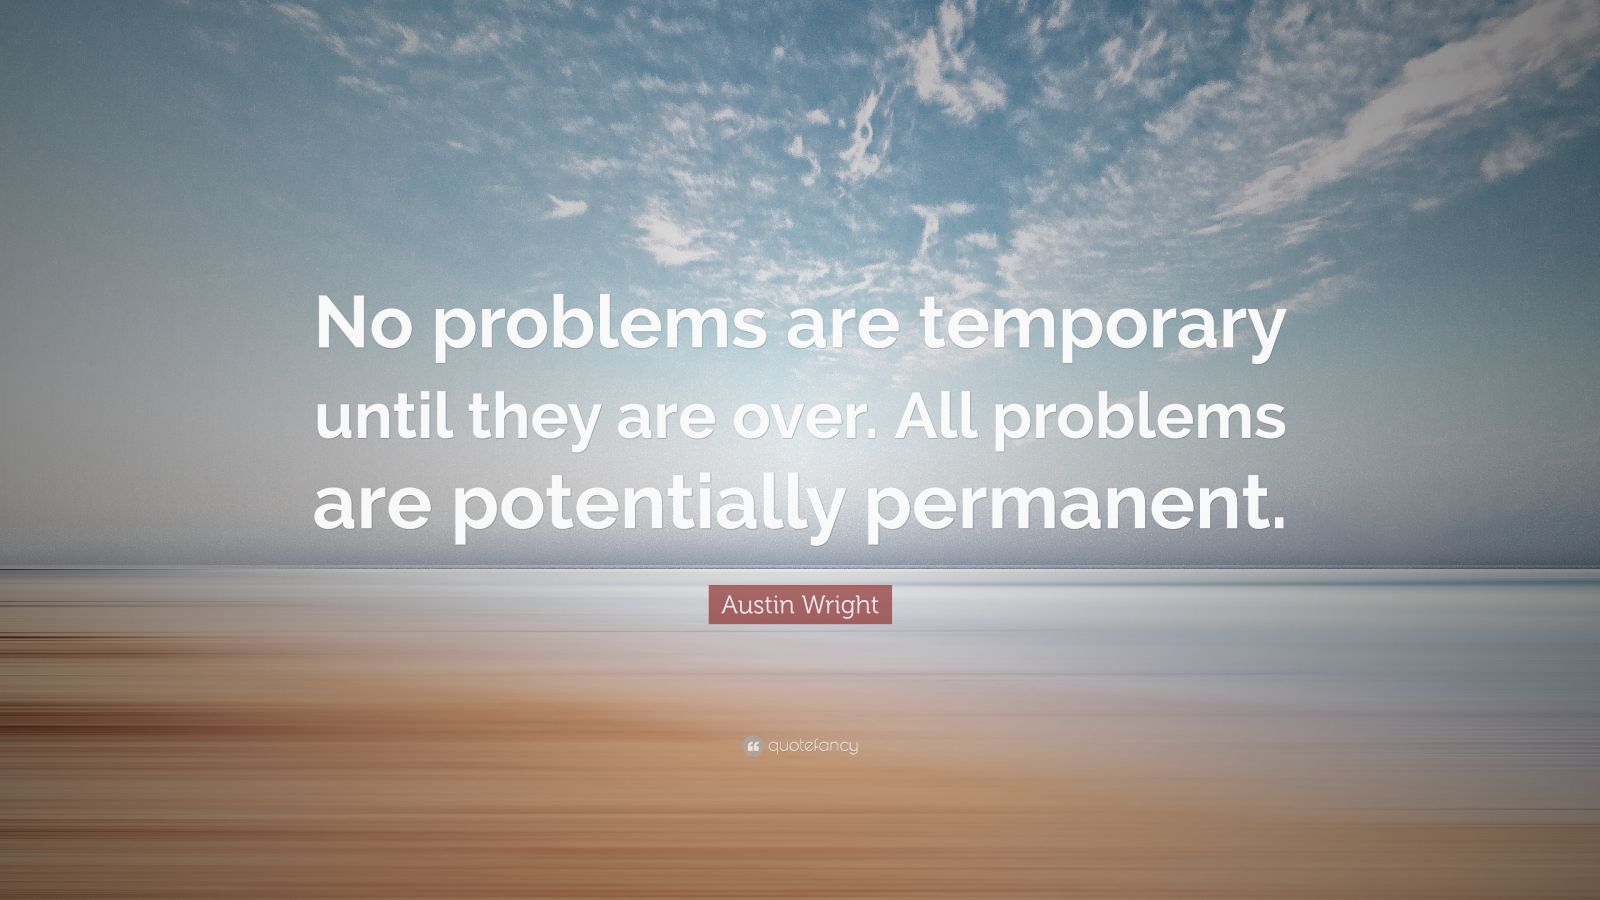 Austin Wright Quote: “No problems are temporary until they are over ...